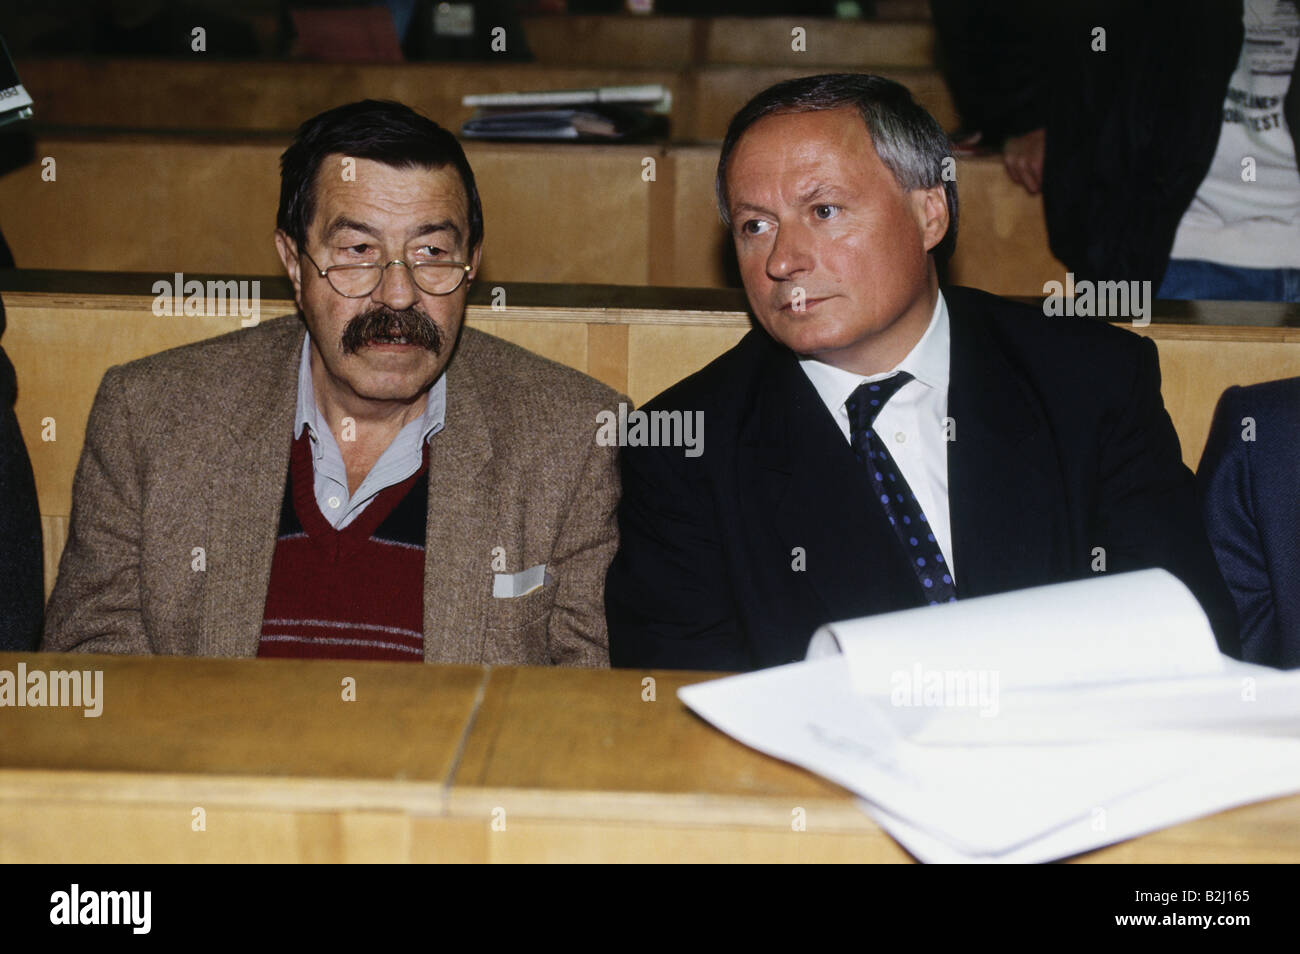 Lafontaine, Oskar, * 16.9.1943, German politician, Primeminister of Saarland 1985 - 1998, party congress of the Social Democrats, Leipzig, 26.2.1990, with Guenter Grass, Stock Photo